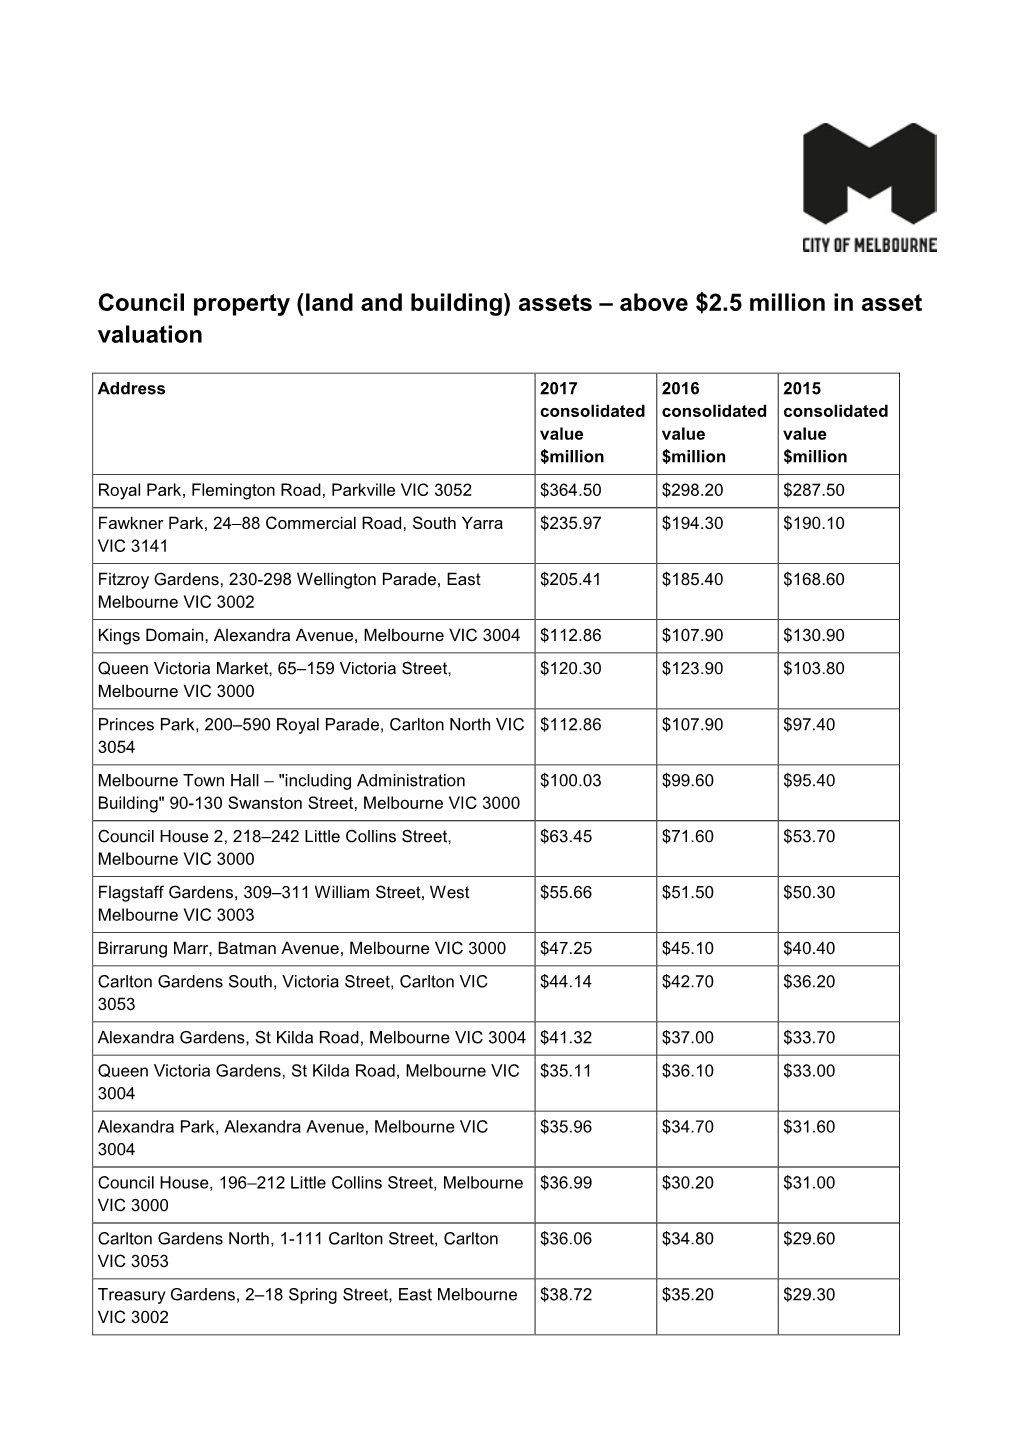 Council Property (Land and Building) Assets – Above $2.5 Million in Asset Valuation